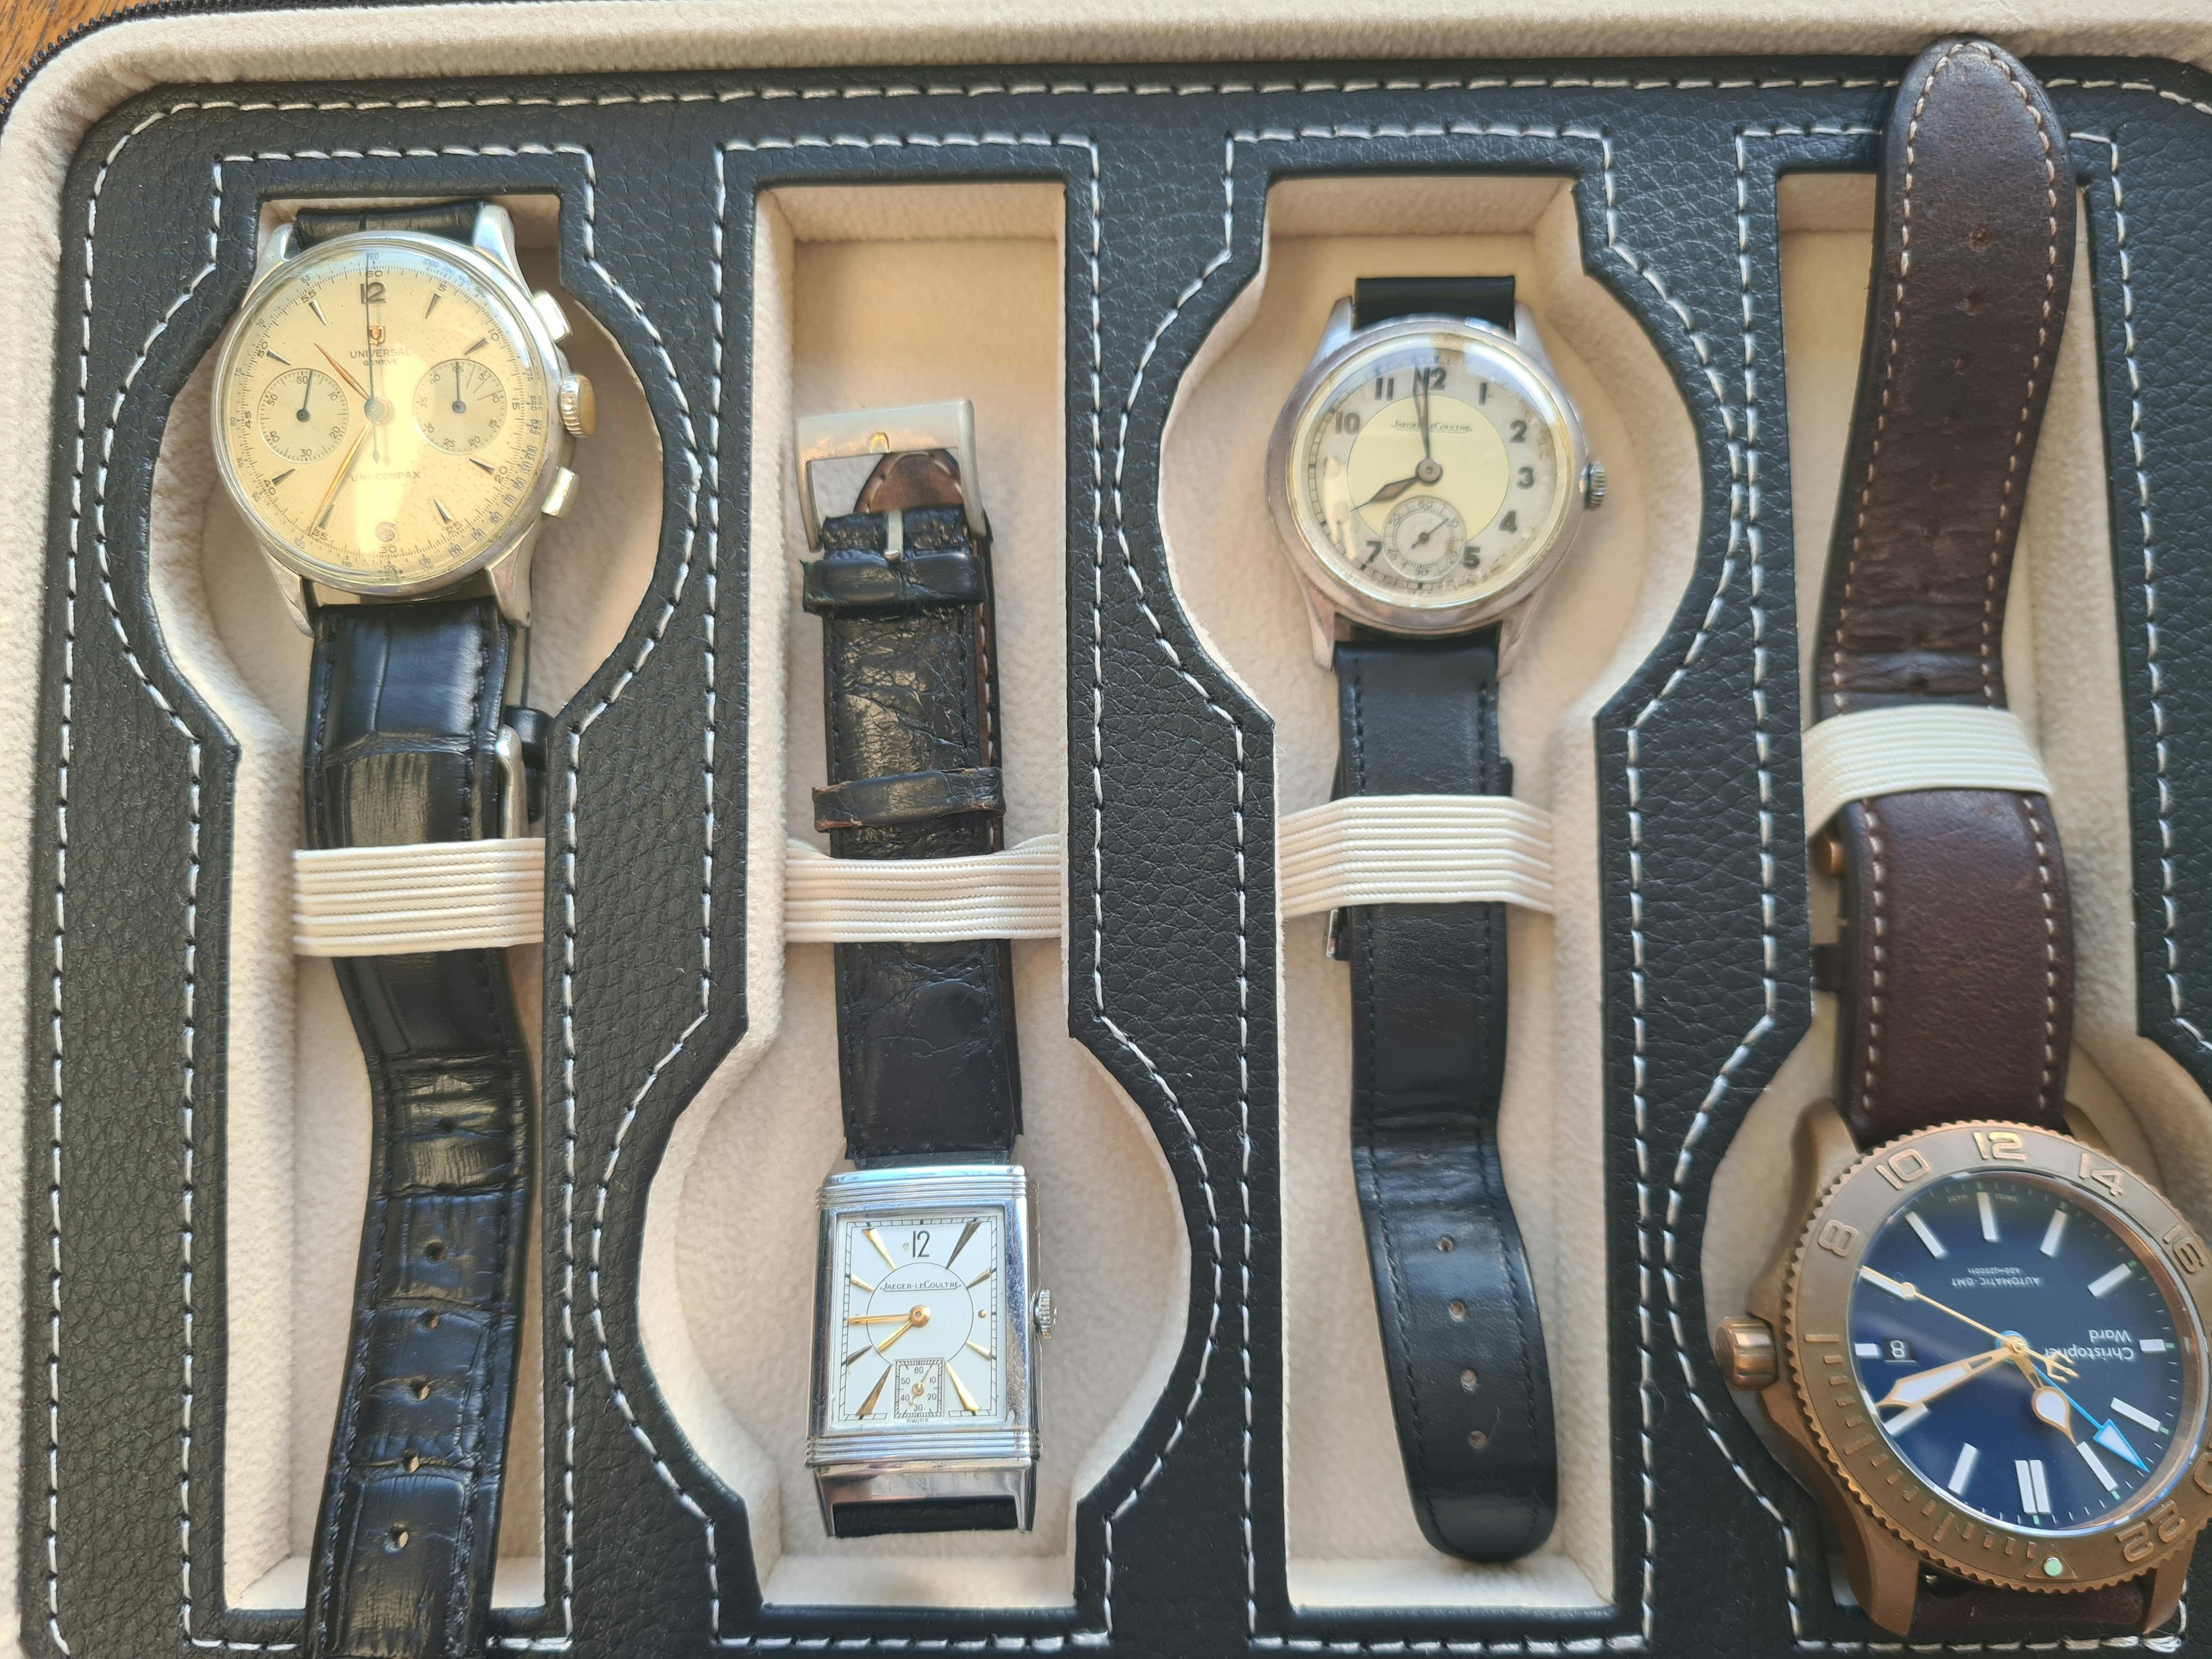 Getting my watches ready in my watchbox to take to a Meetup